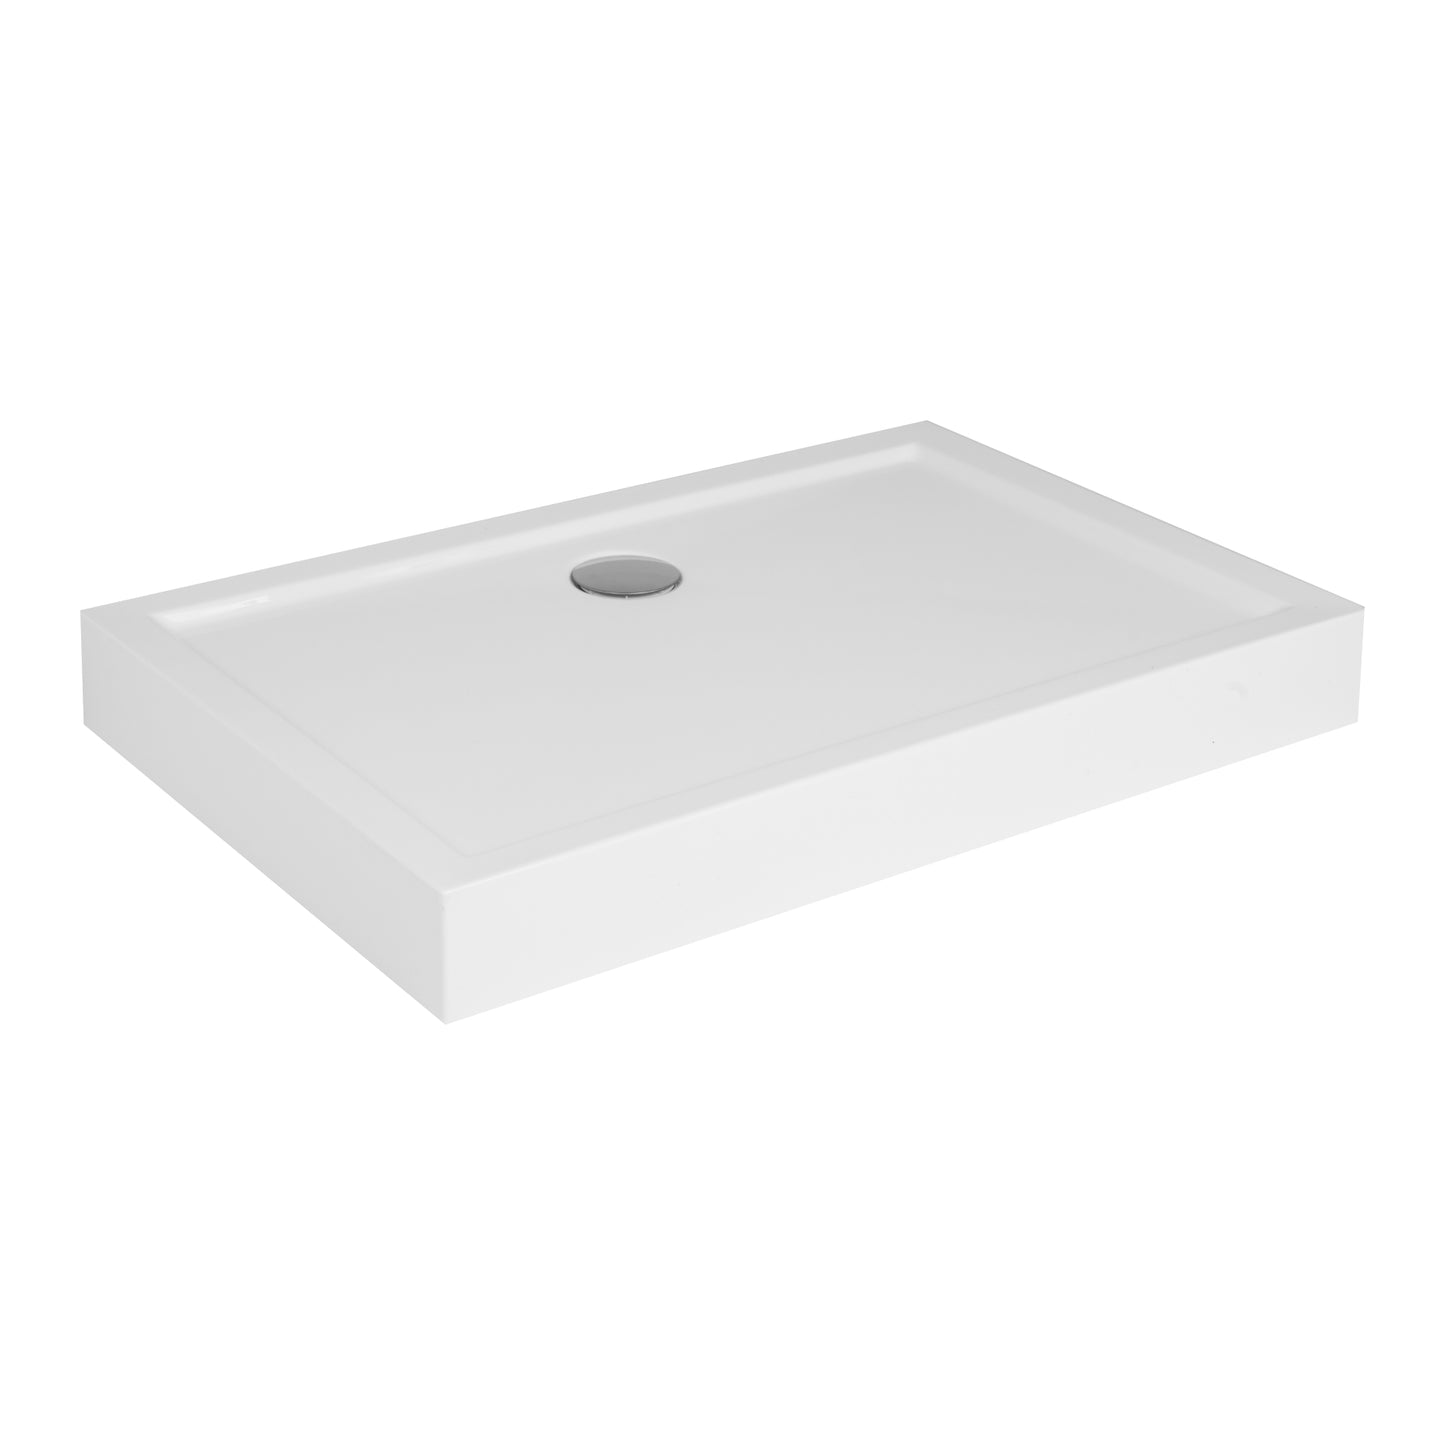 Load image into Gallery viewer, Acrylic rectangular shower base compact GOLIAT
